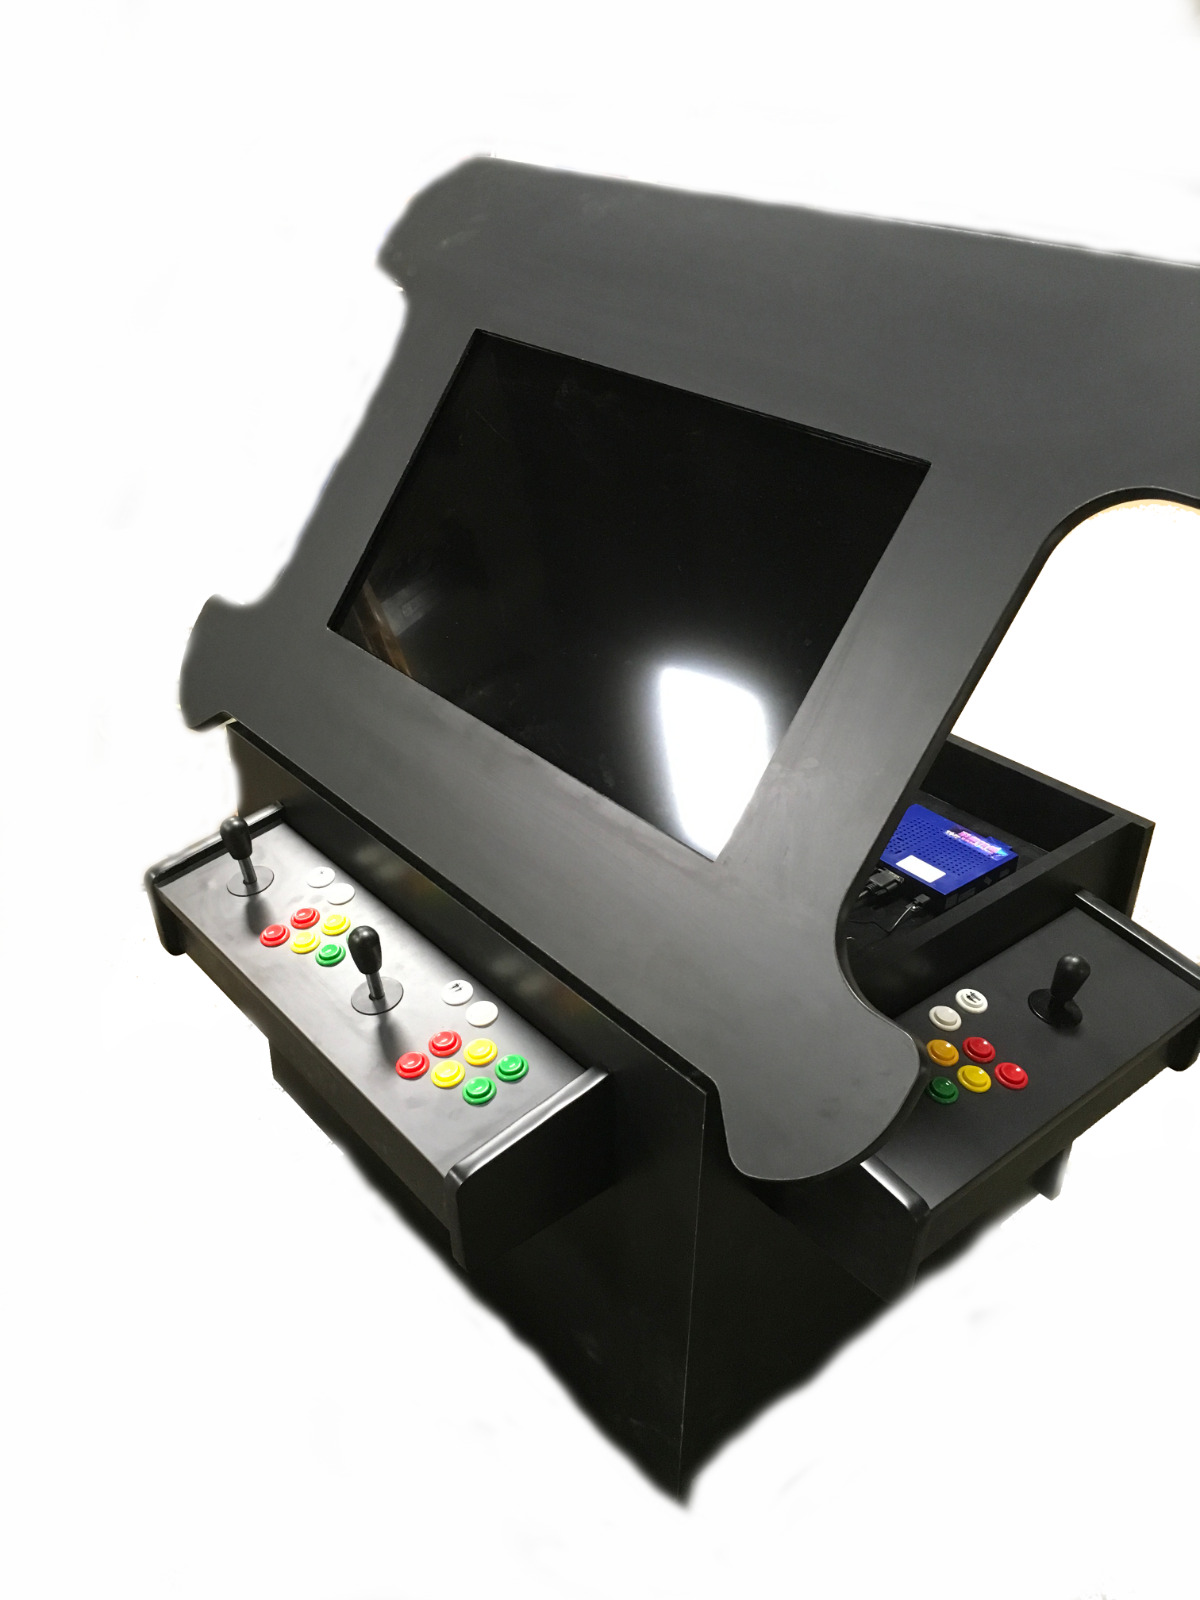 Customize Your Own Three Sided Arcade With Many Options To Choose From